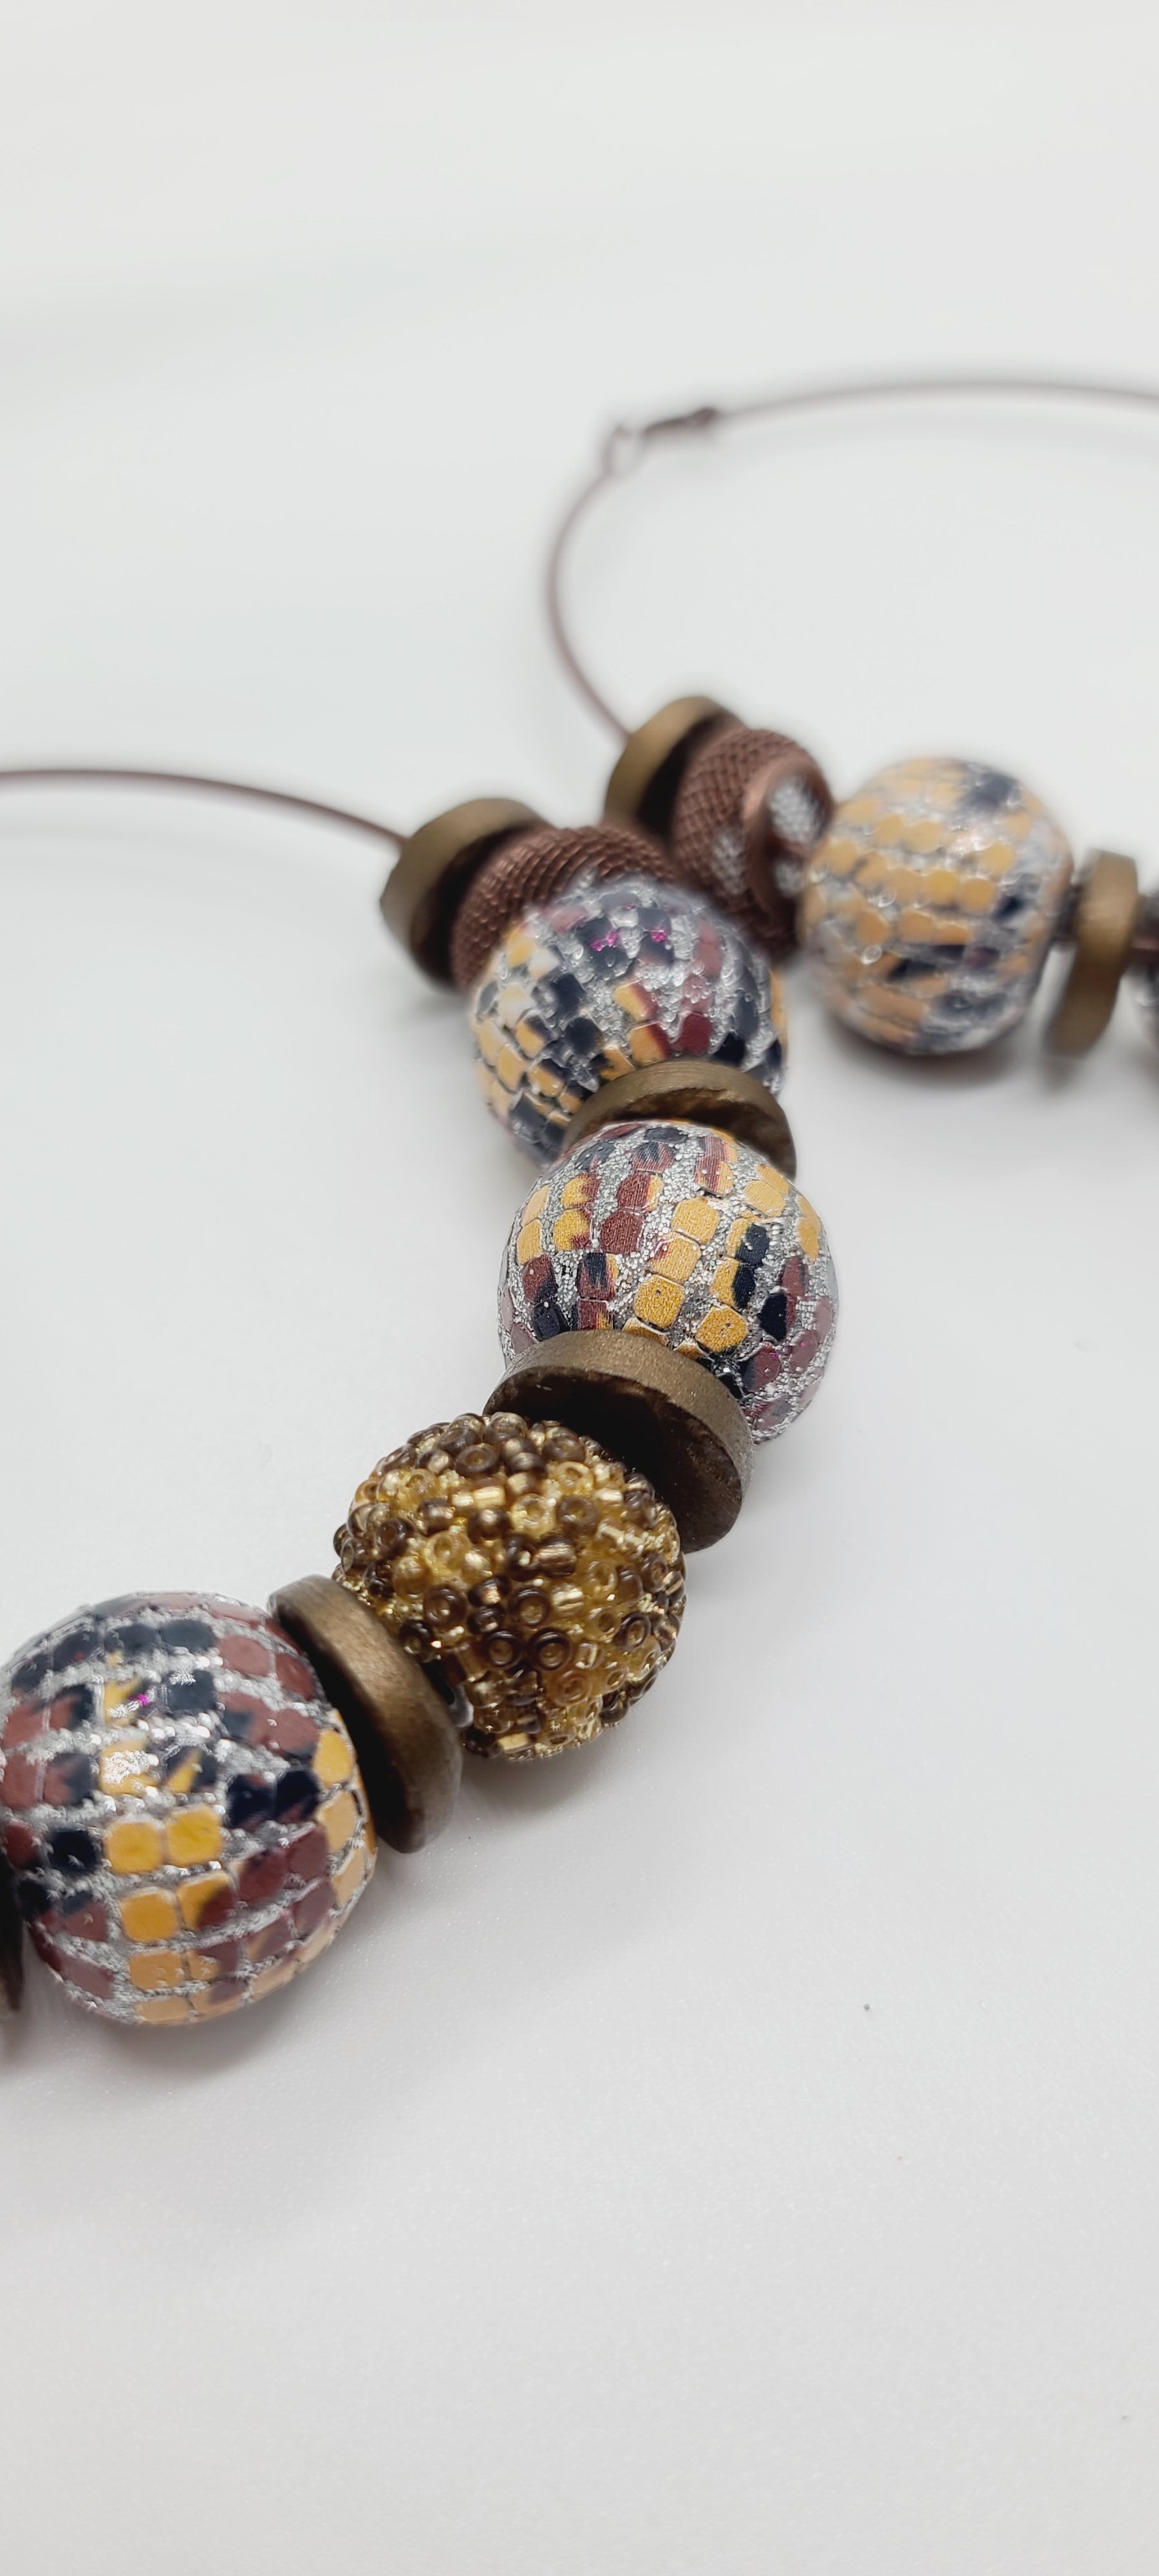 Length: 4x4 inches | Weight: 2.7 ounces  Distinctly You! These earrings are made with large brown hoops, 15mm and 12mm assorted wooden and sequin beads, 10mm resin gold rondelles, and brown mesh rondelles.